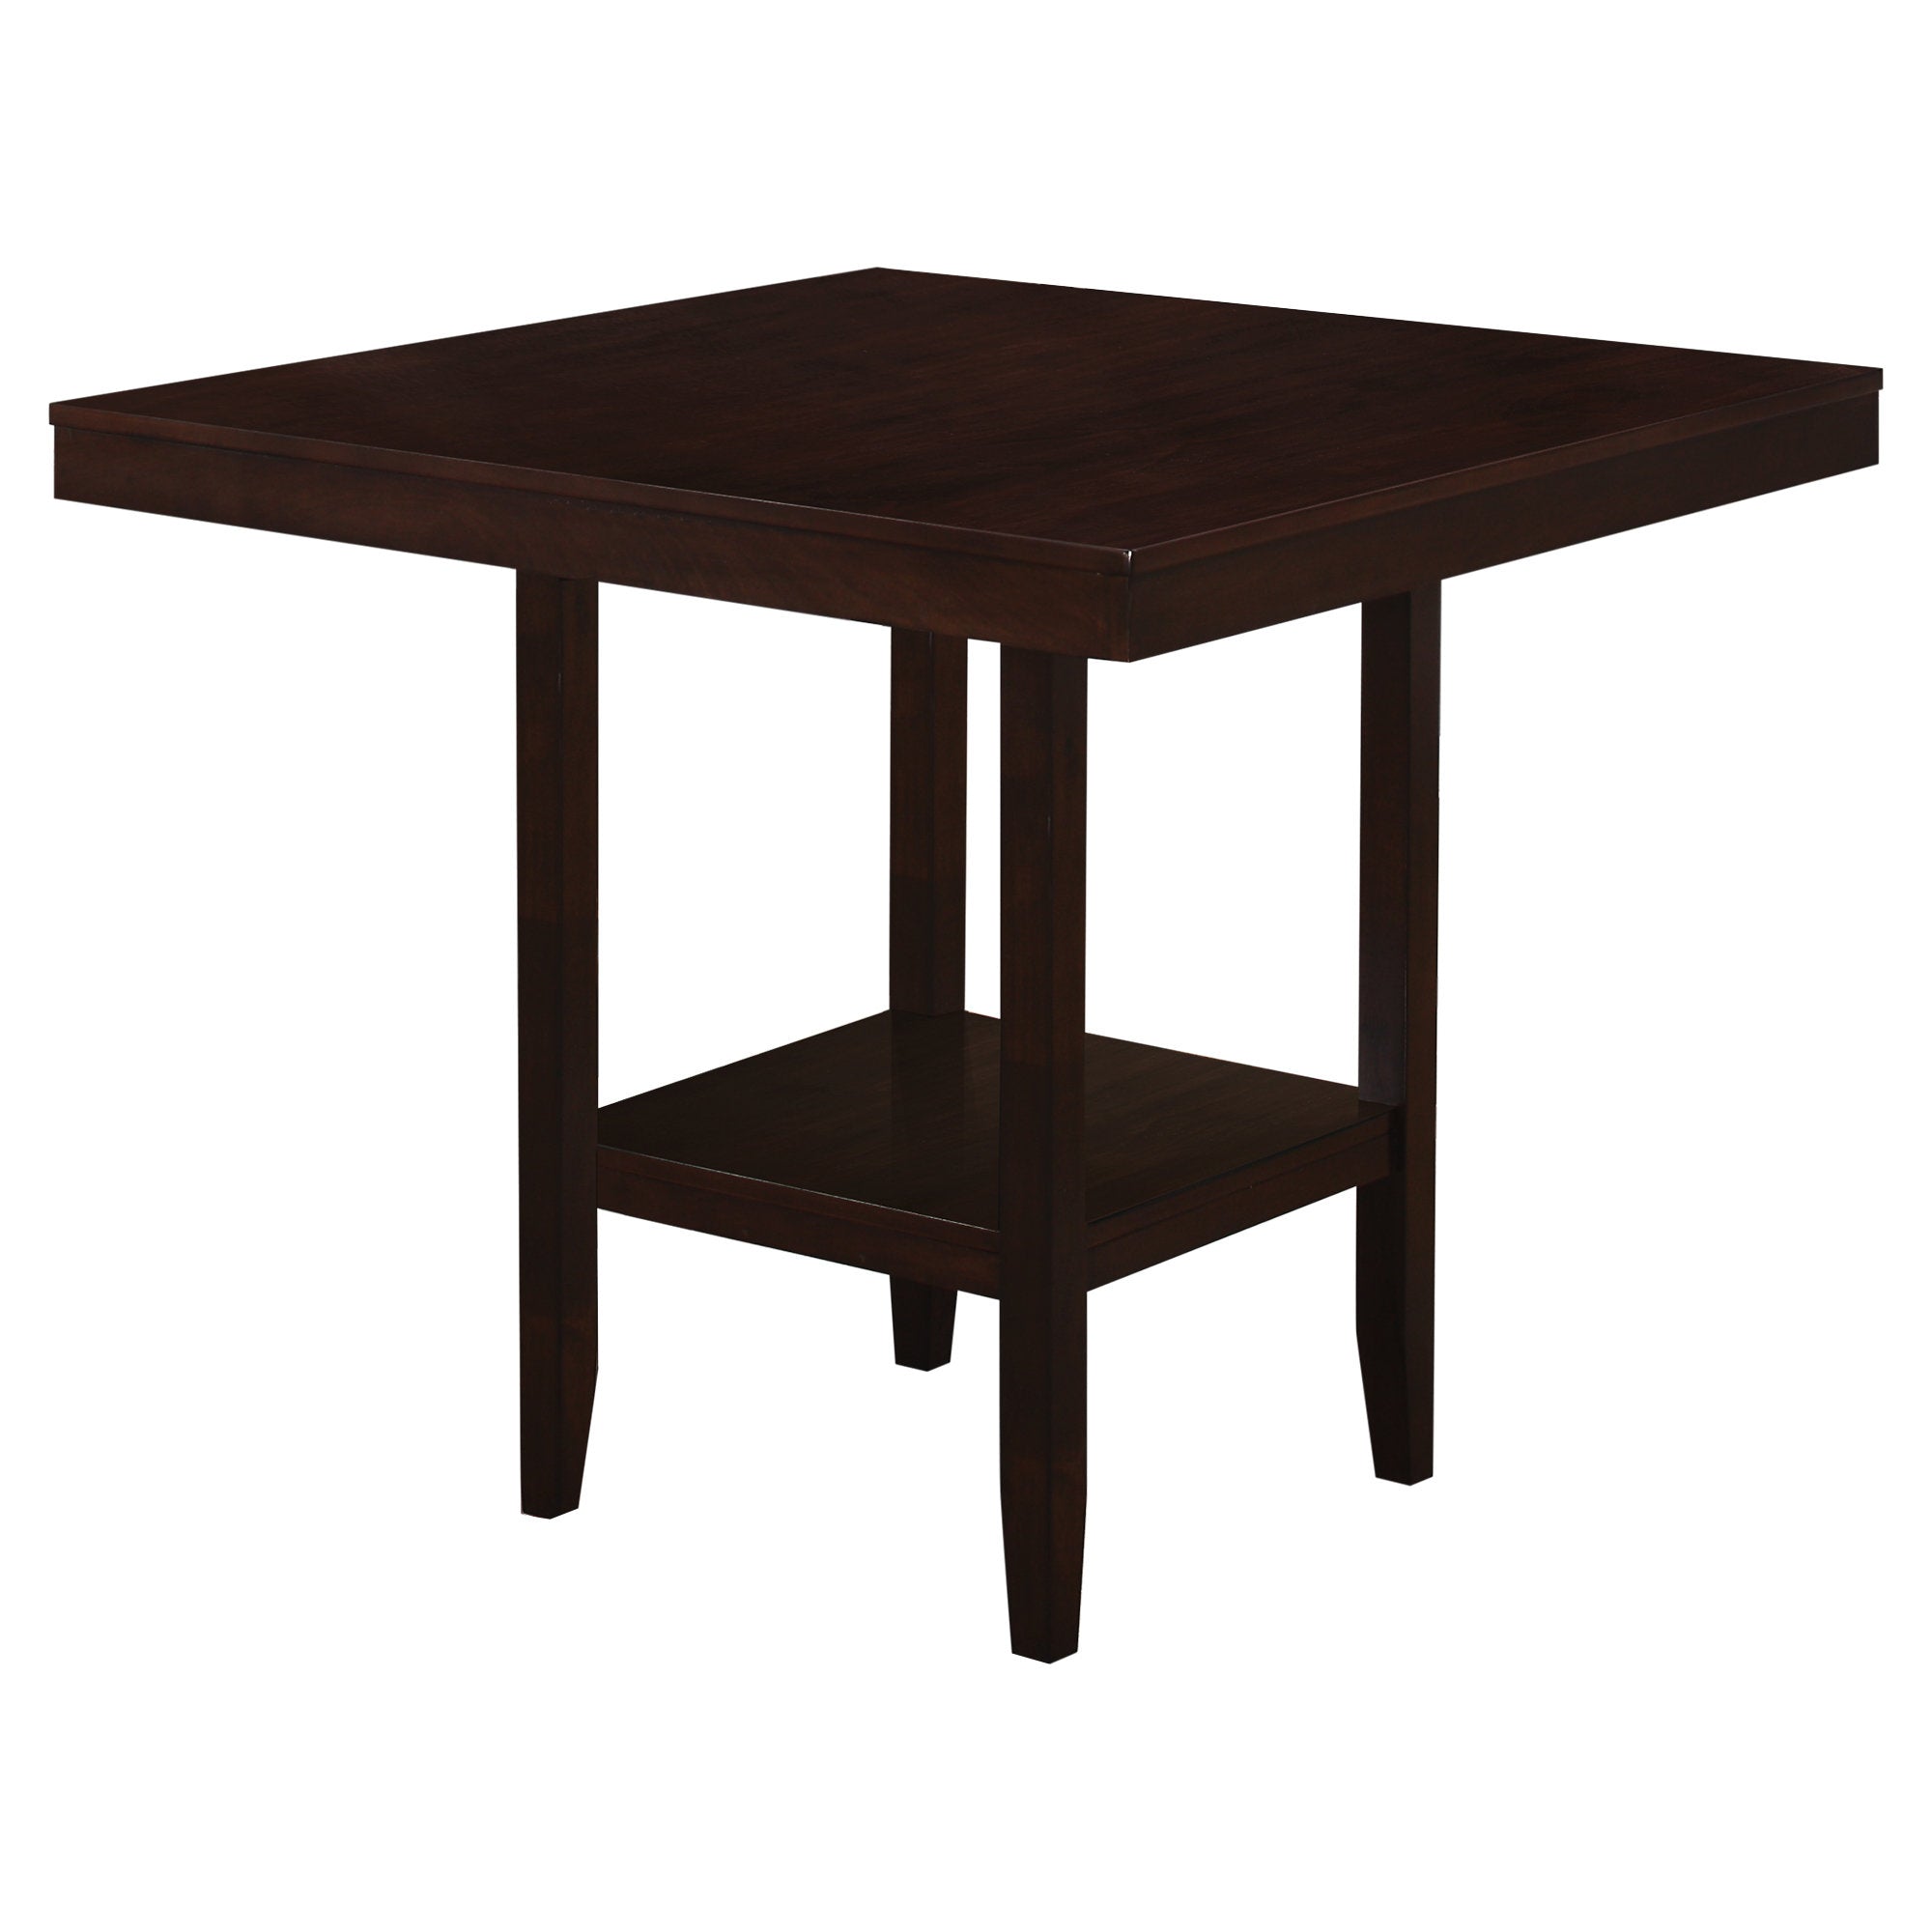 Dining Table - 42X 42 / Espresso Counter Height